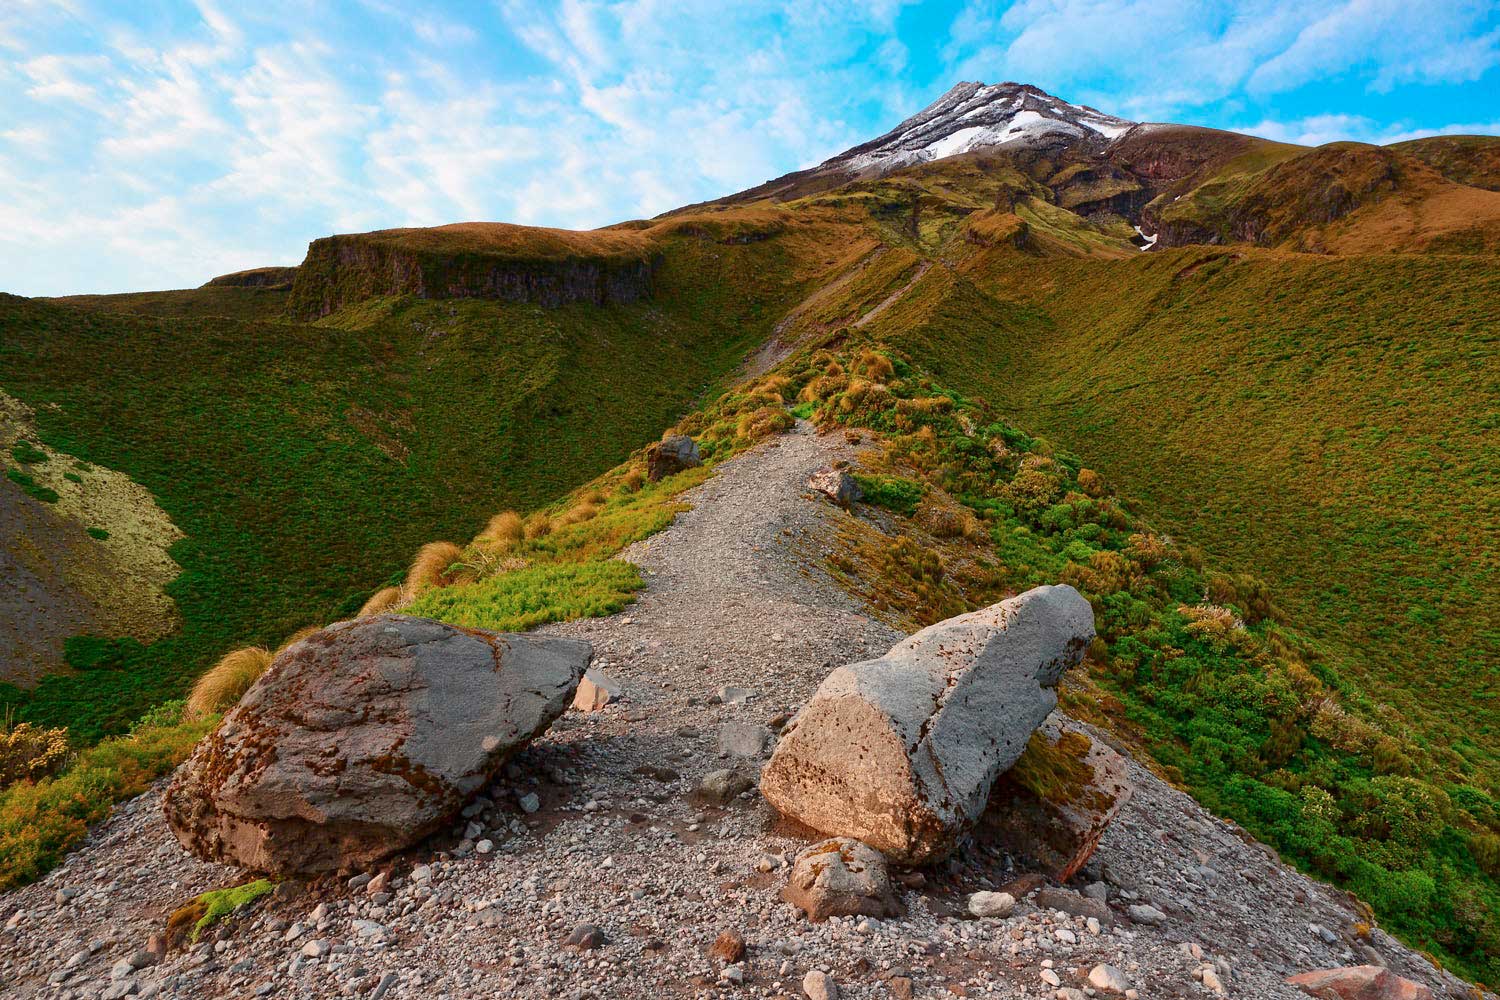 A pathway along a ridge leading up a mountainside with the peak of Mt Taranaki in the distance, Egmont National Park